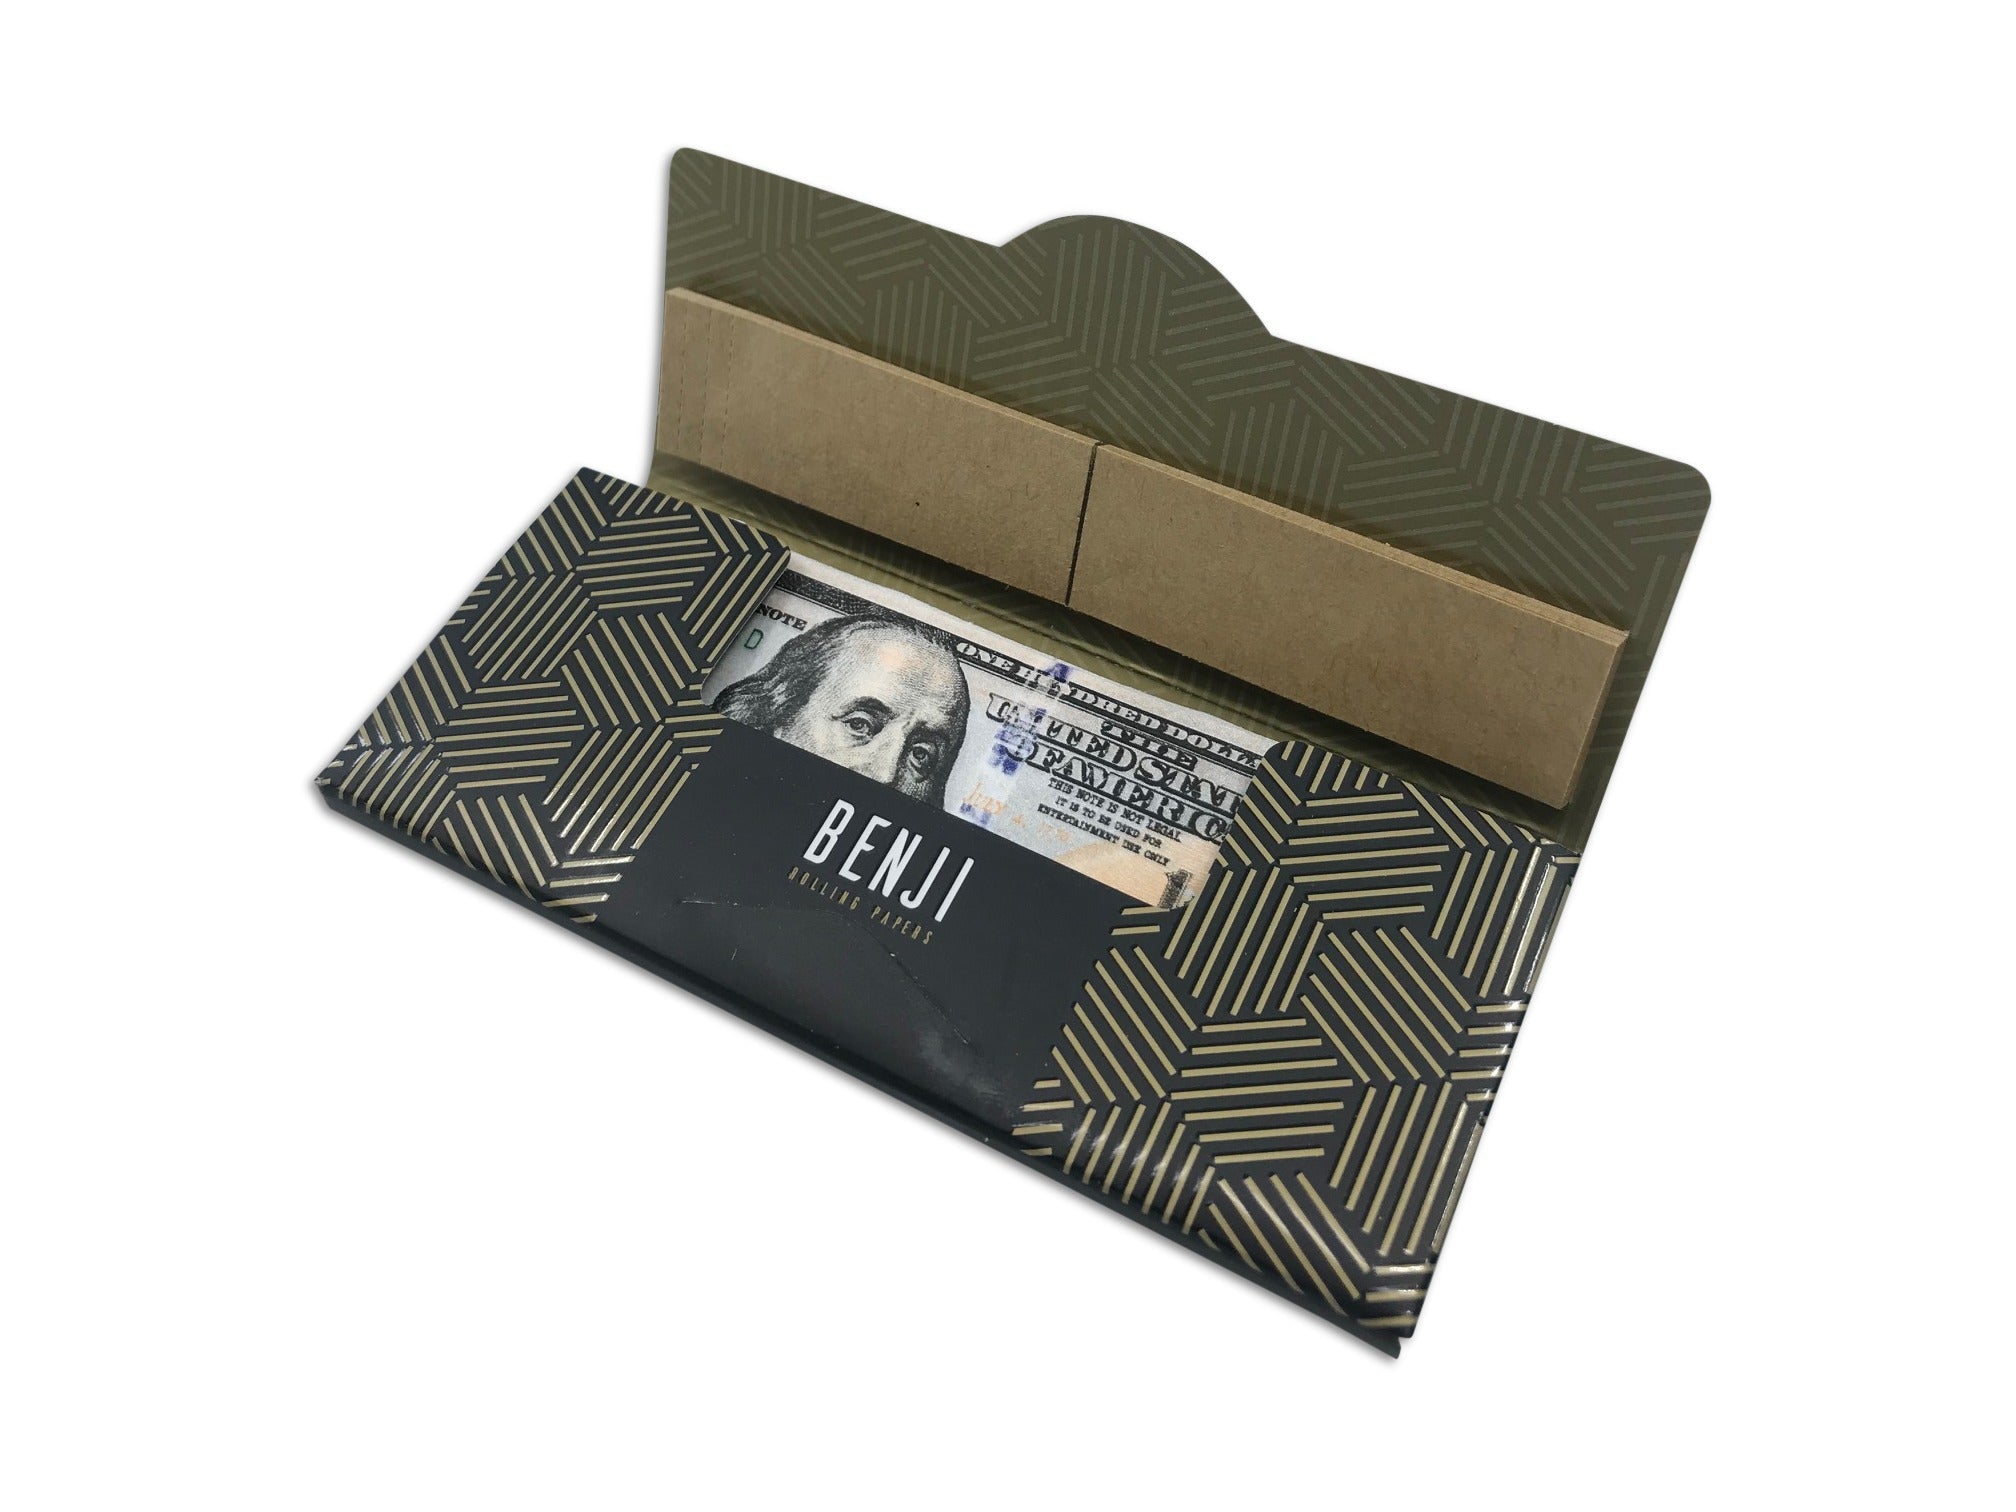 Benji $100 Print Rolling Paper Booklets (3 pack) Rolling Paper Benji Papers 